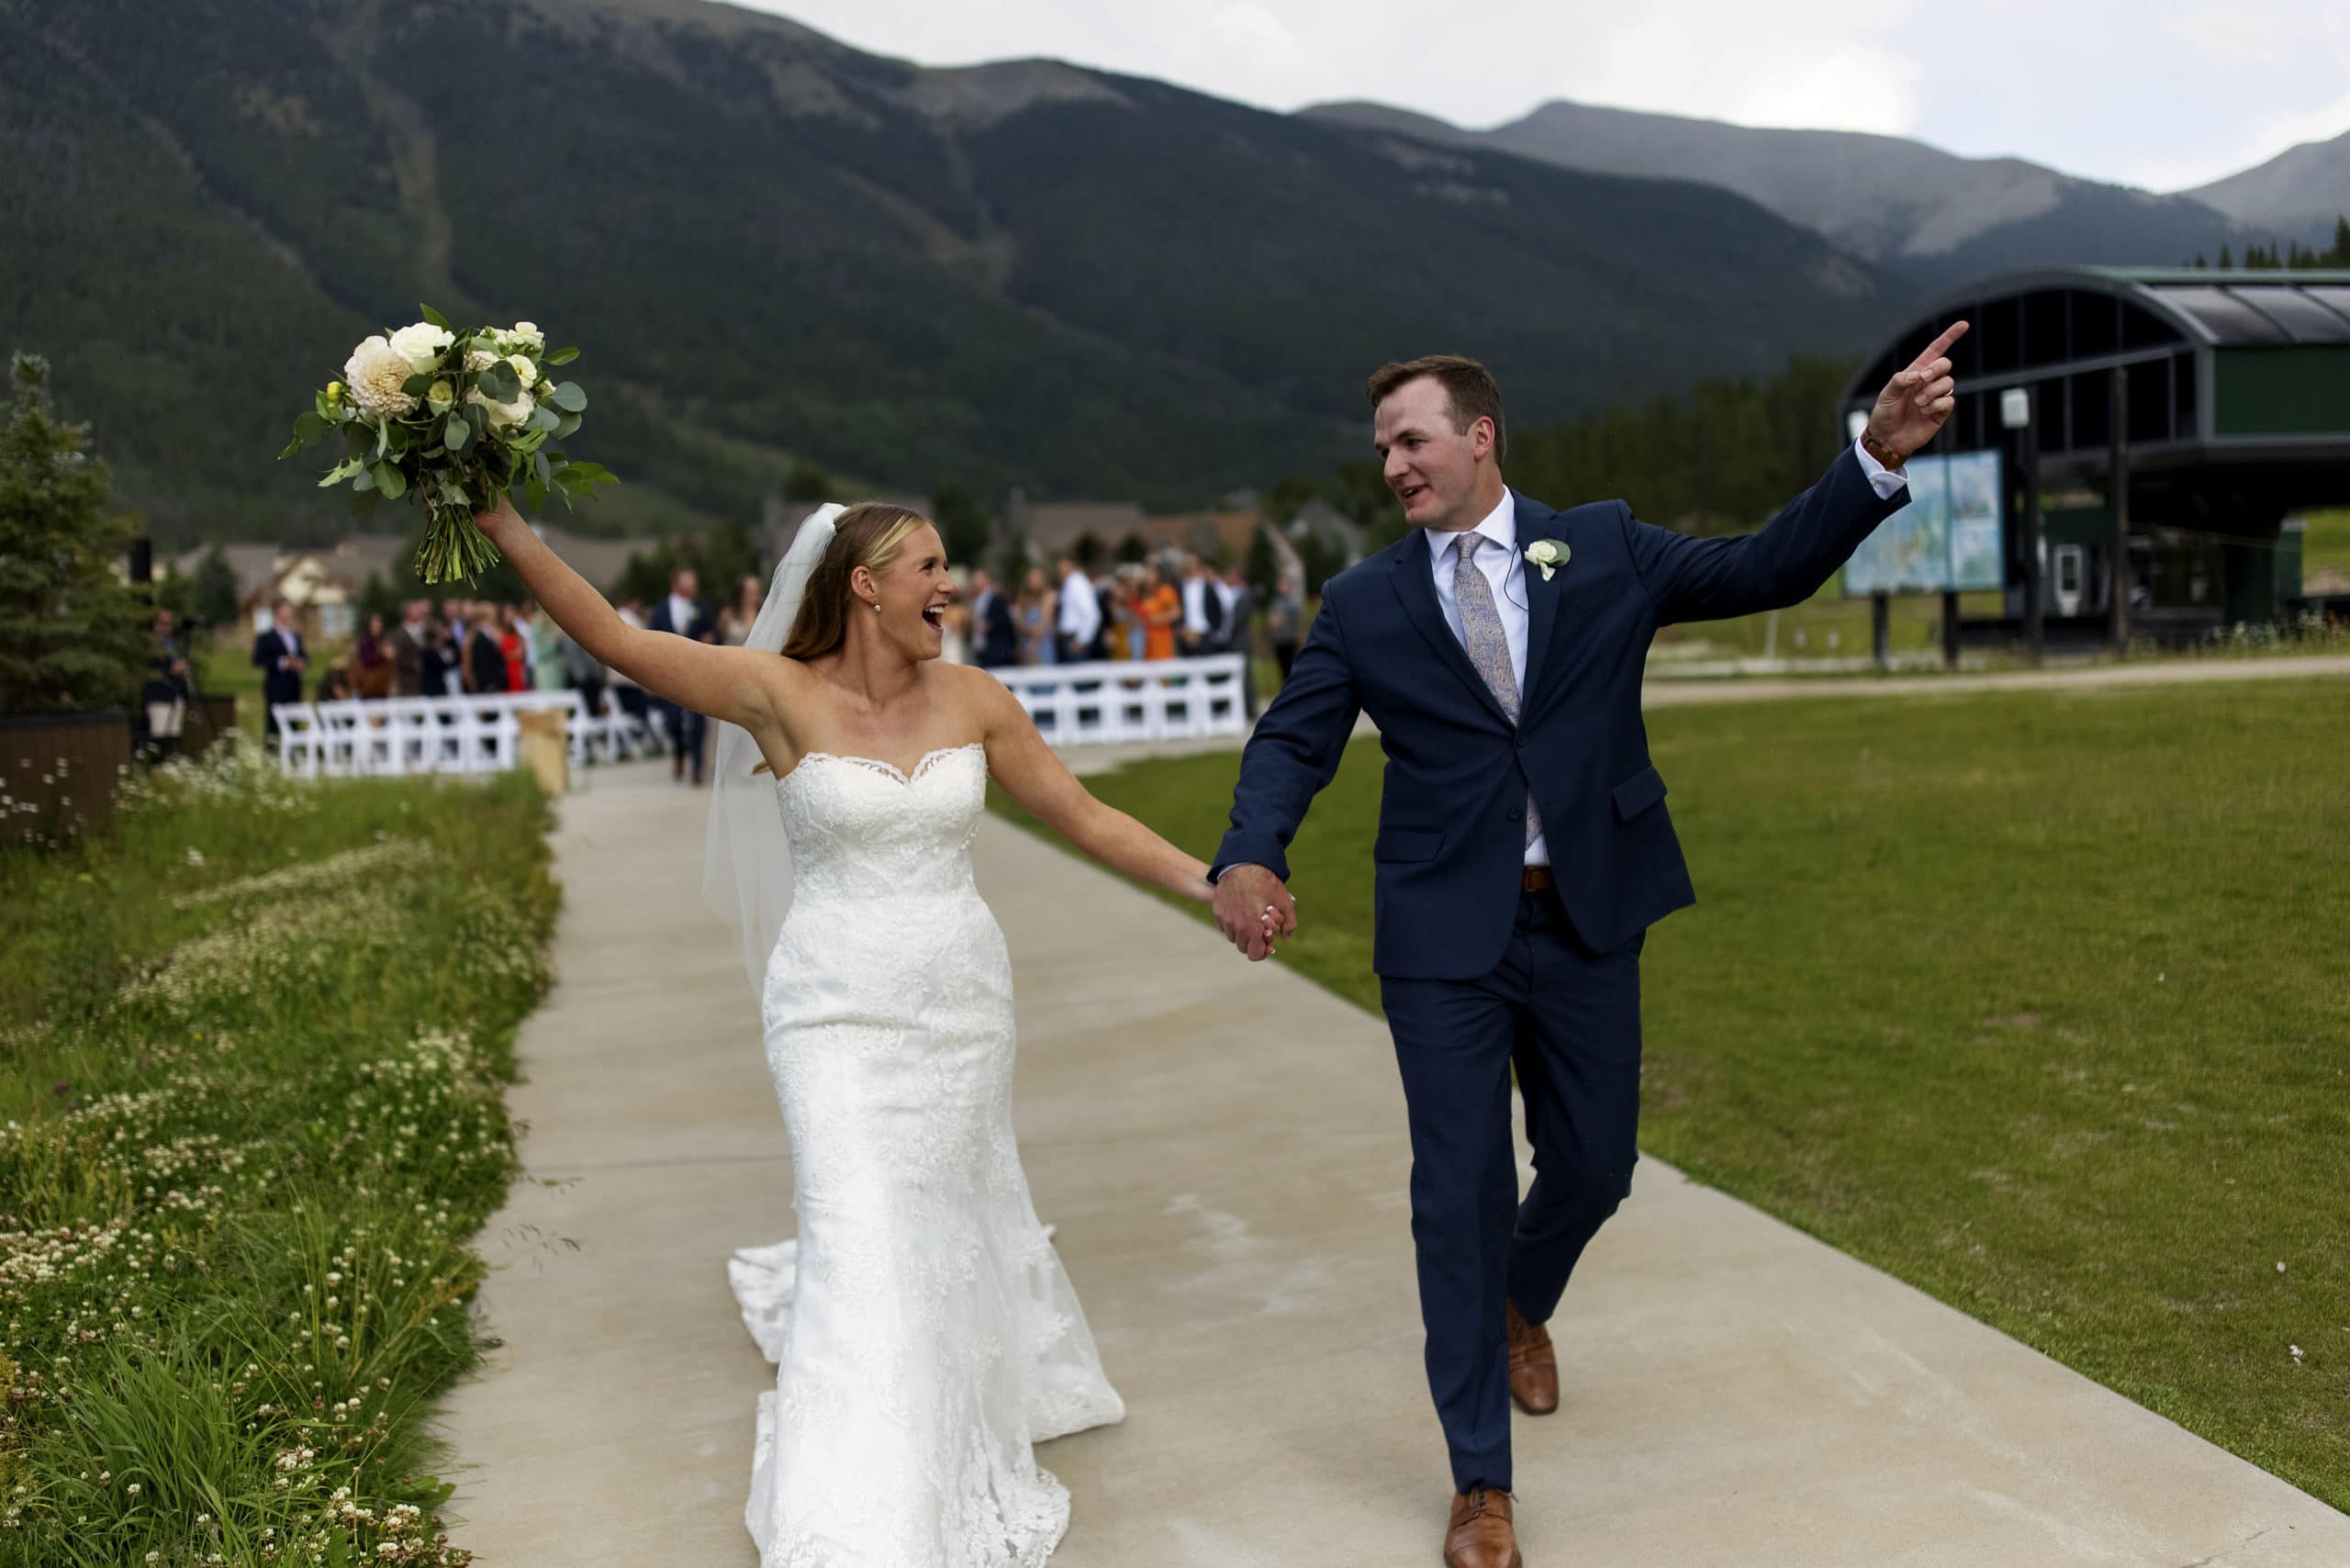 The bride and groom celebrate as they walk down the aisle together after their wedding ceremony at Copper Mountain’s Copper Vista